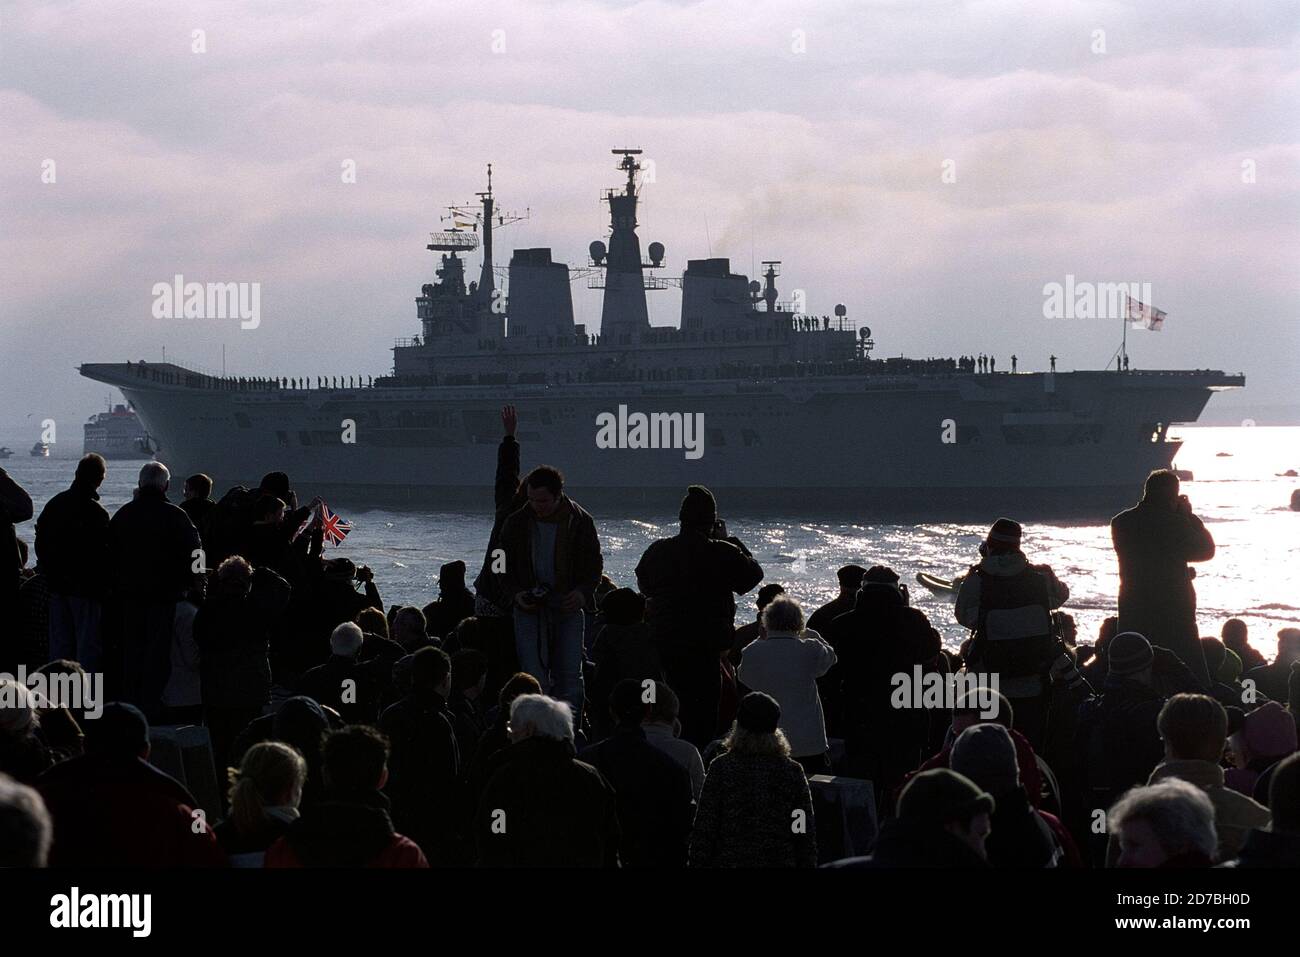 AJAXNETPHOTO. 11 JAN 2003. PORTSMOUTH, ENGLAND. - ARK LEAVES - (PMO5) -  HMS ARK ROYAL LEAVES PORTSMOUTH BOUND FOR 'SOMEWHERE' EAST OF SUEZ. THOUSANDS OF WELL WISHERS GATHERED ON THE CITY'S OLD HOT WALLS RAMPARTS TO SEE THE CARRIER OFF.  PHOTO:JONATHAN EASTLAND/AJAX.  REF:3 13 01 5 Stock Photo